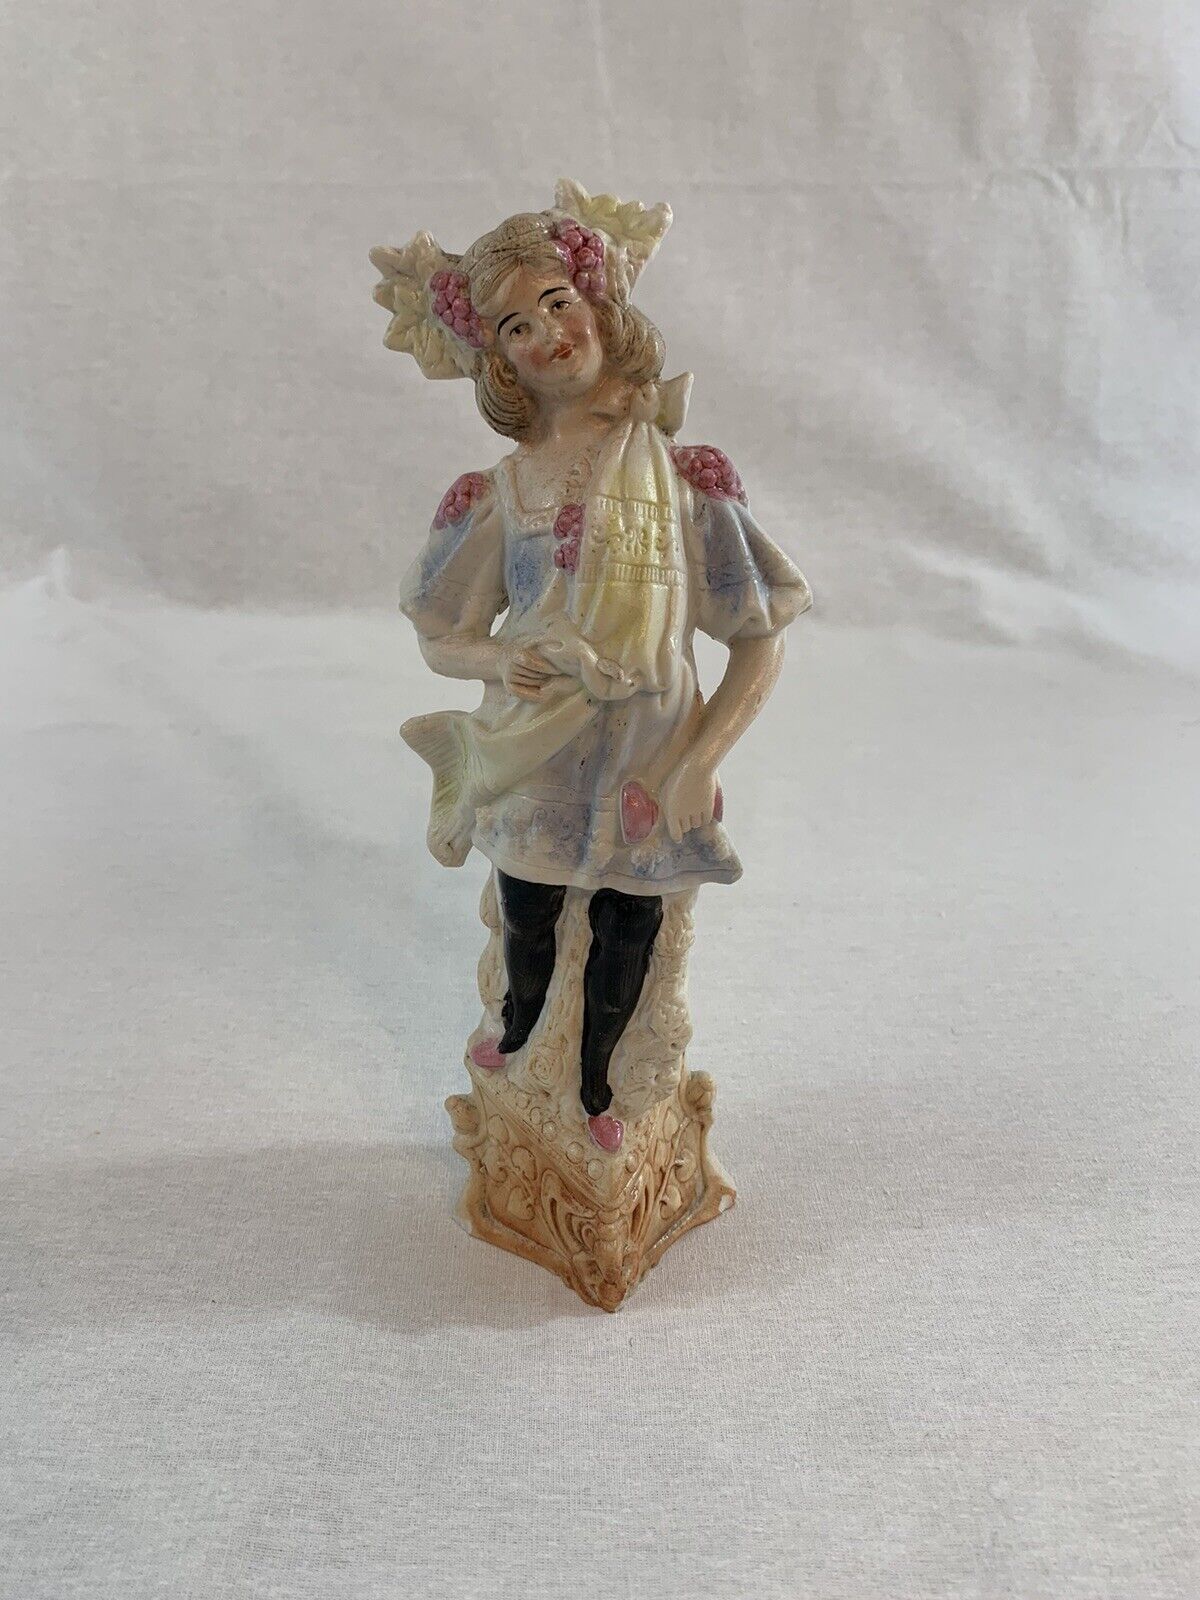 Antique Vintage German Bisque Figurine Young Girl With Grape And Sash